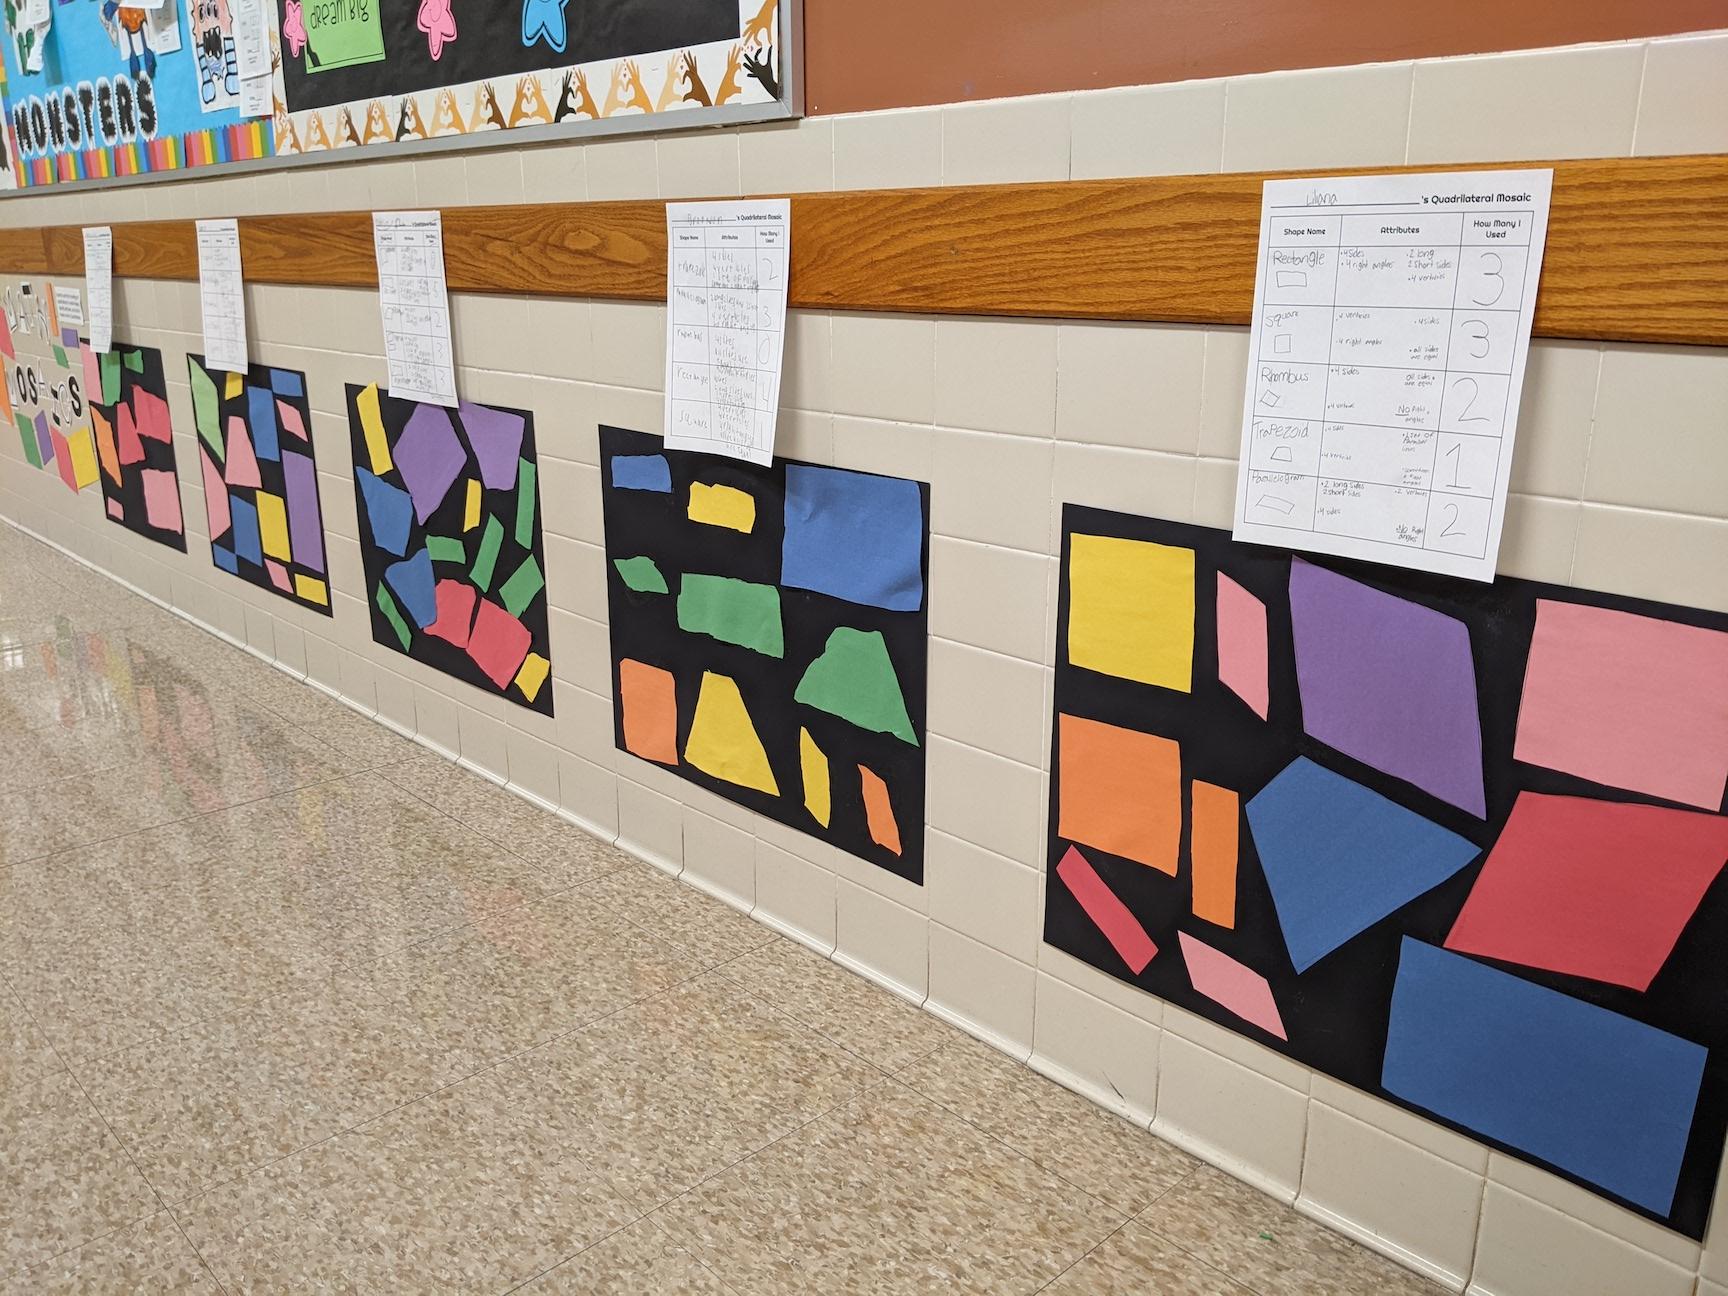 The completed, colorful mosaics are displayed in the hallway for all to enjoy